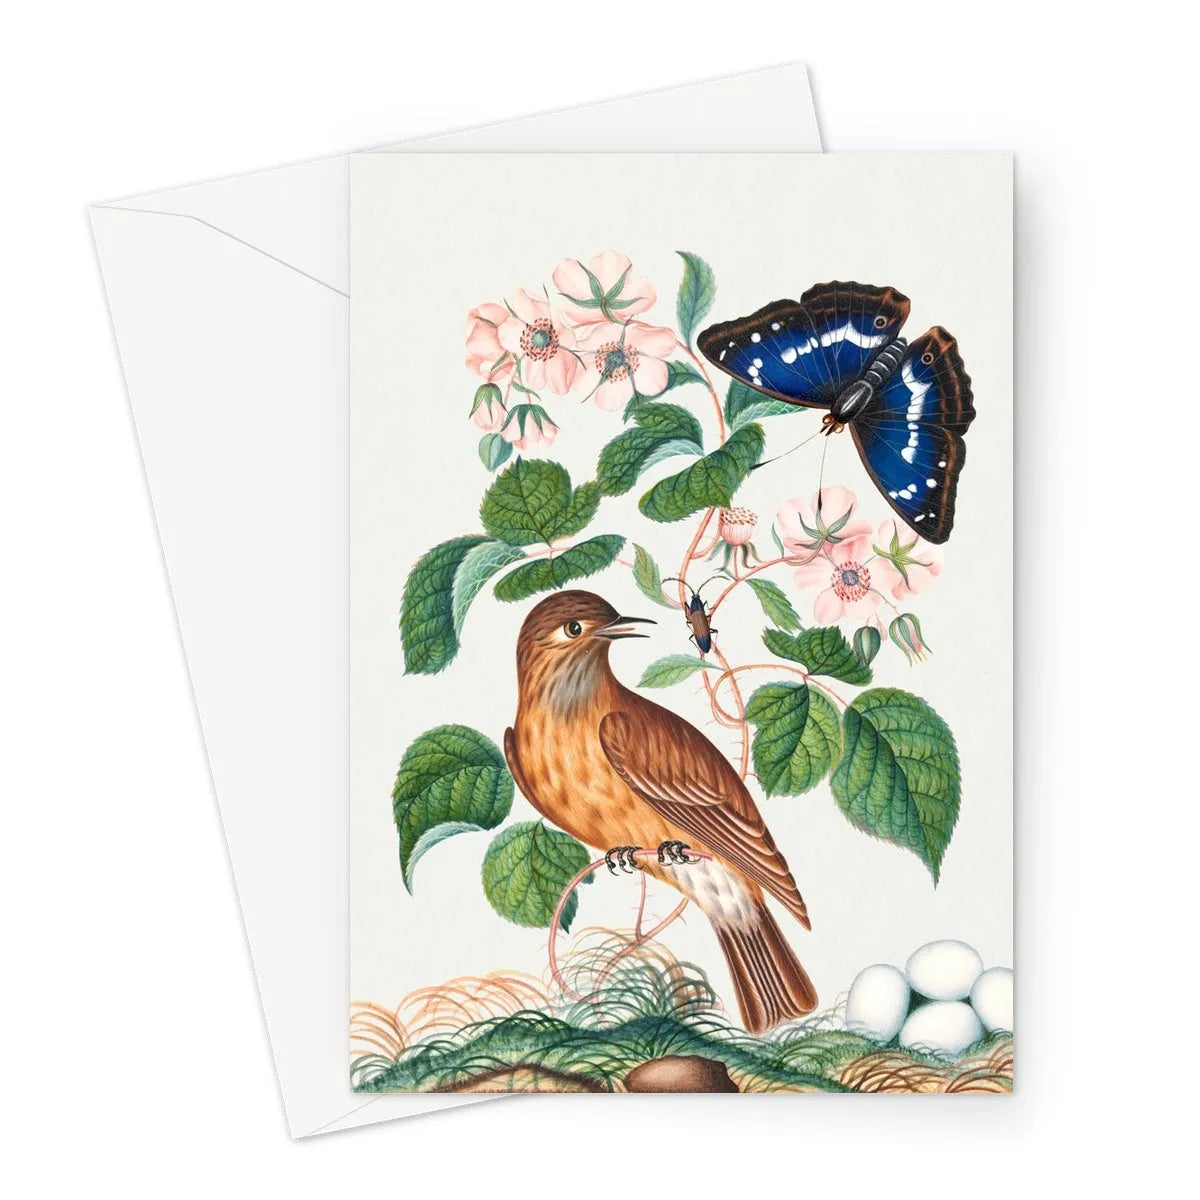 Spotted Flycatcher Purple Emperor And Longhorned Beetle By James Bolton Greeting Card - A5 Portrait / 1 Card - Greeting